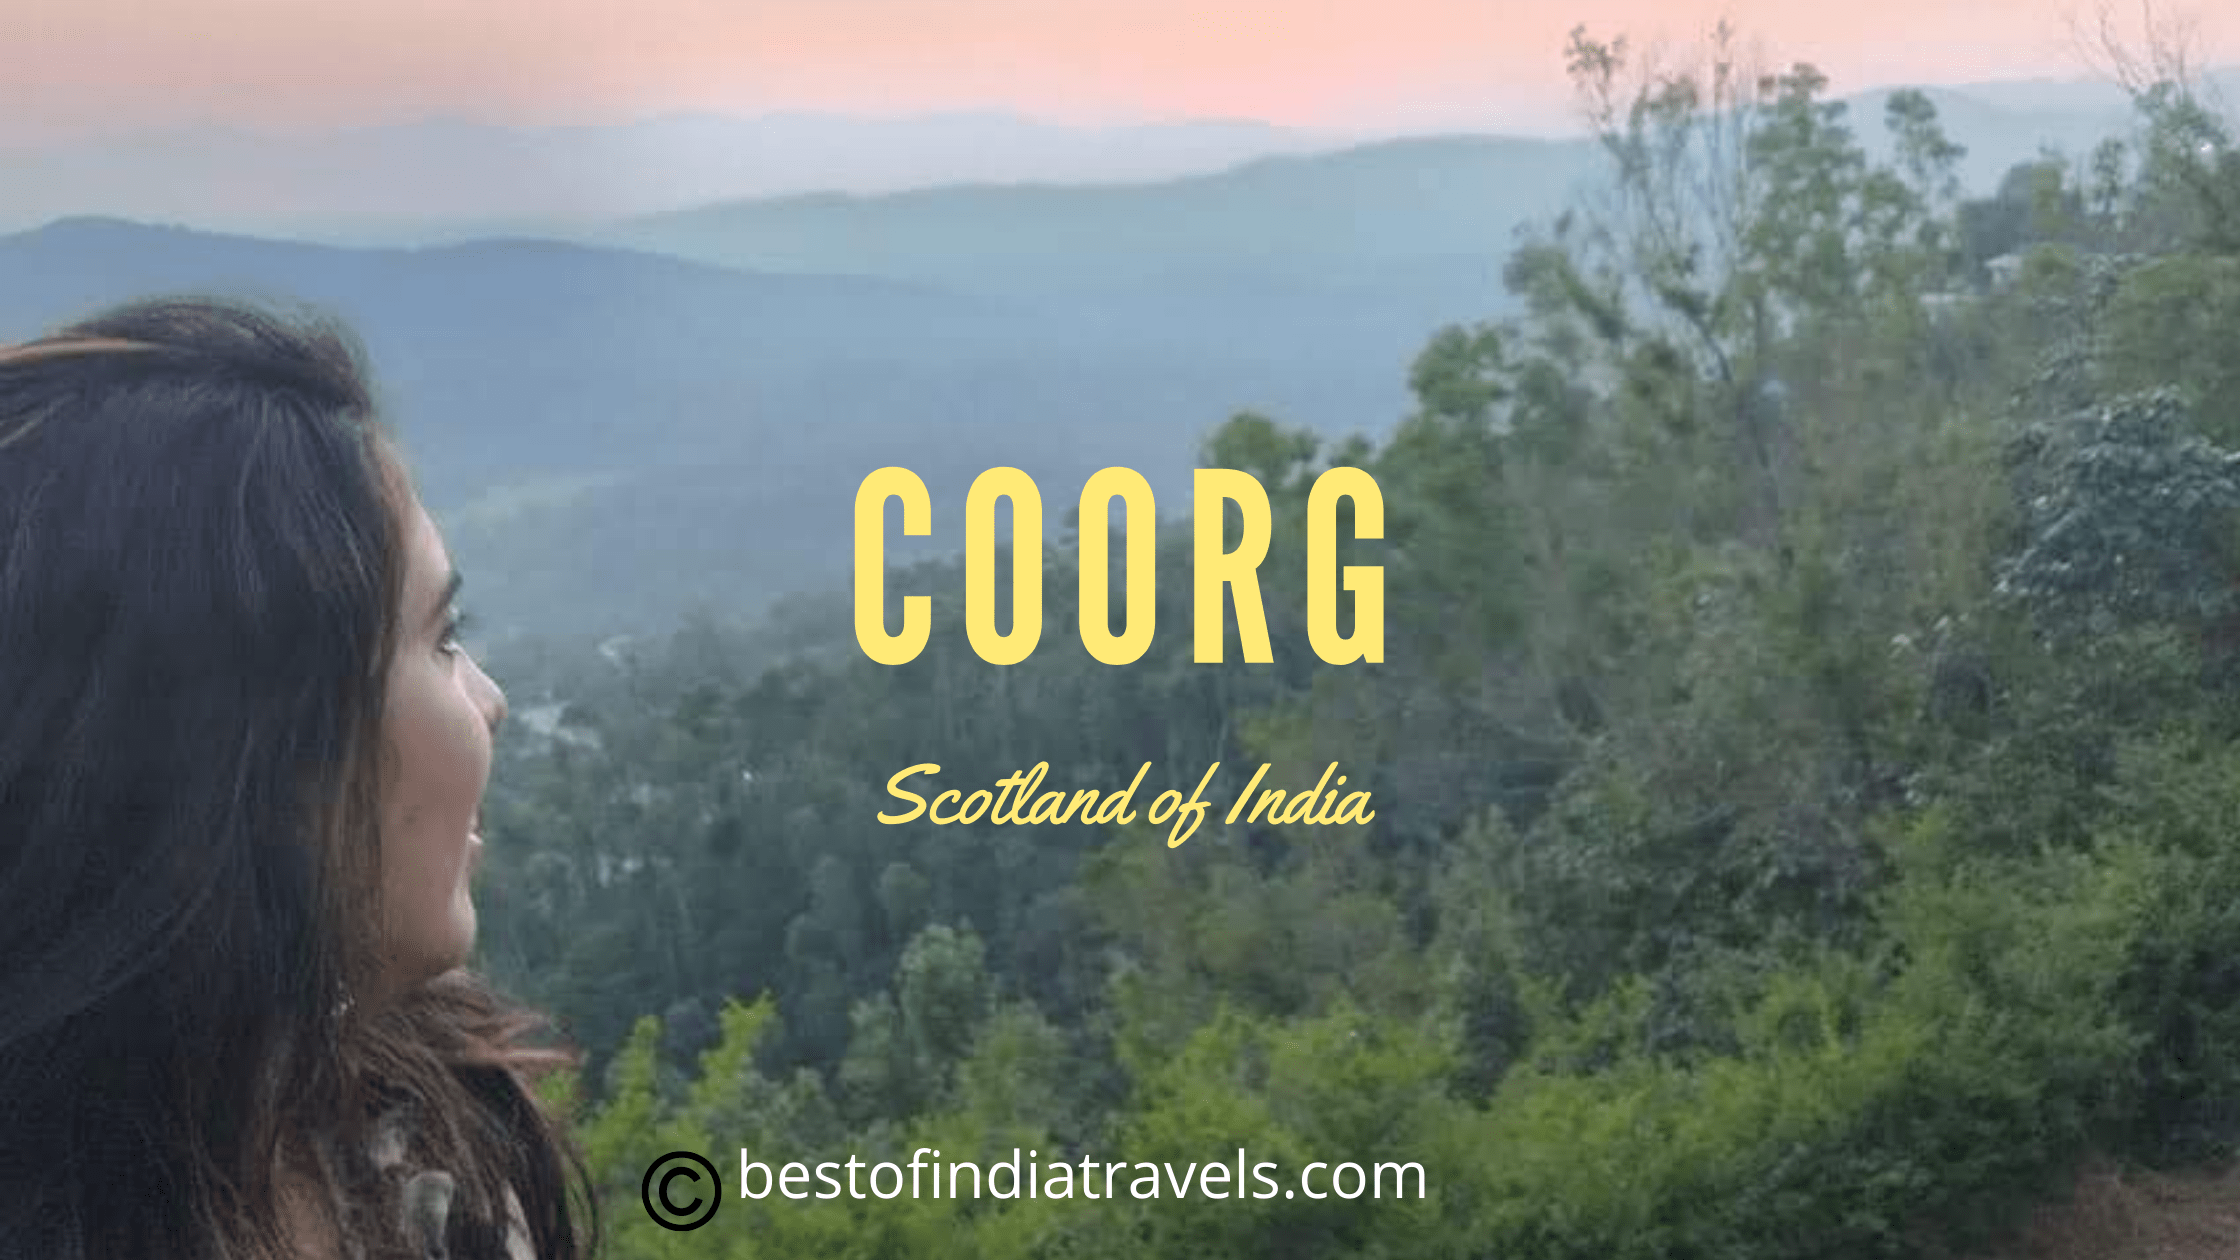 Why is Coorg a popular place in Karnataka?